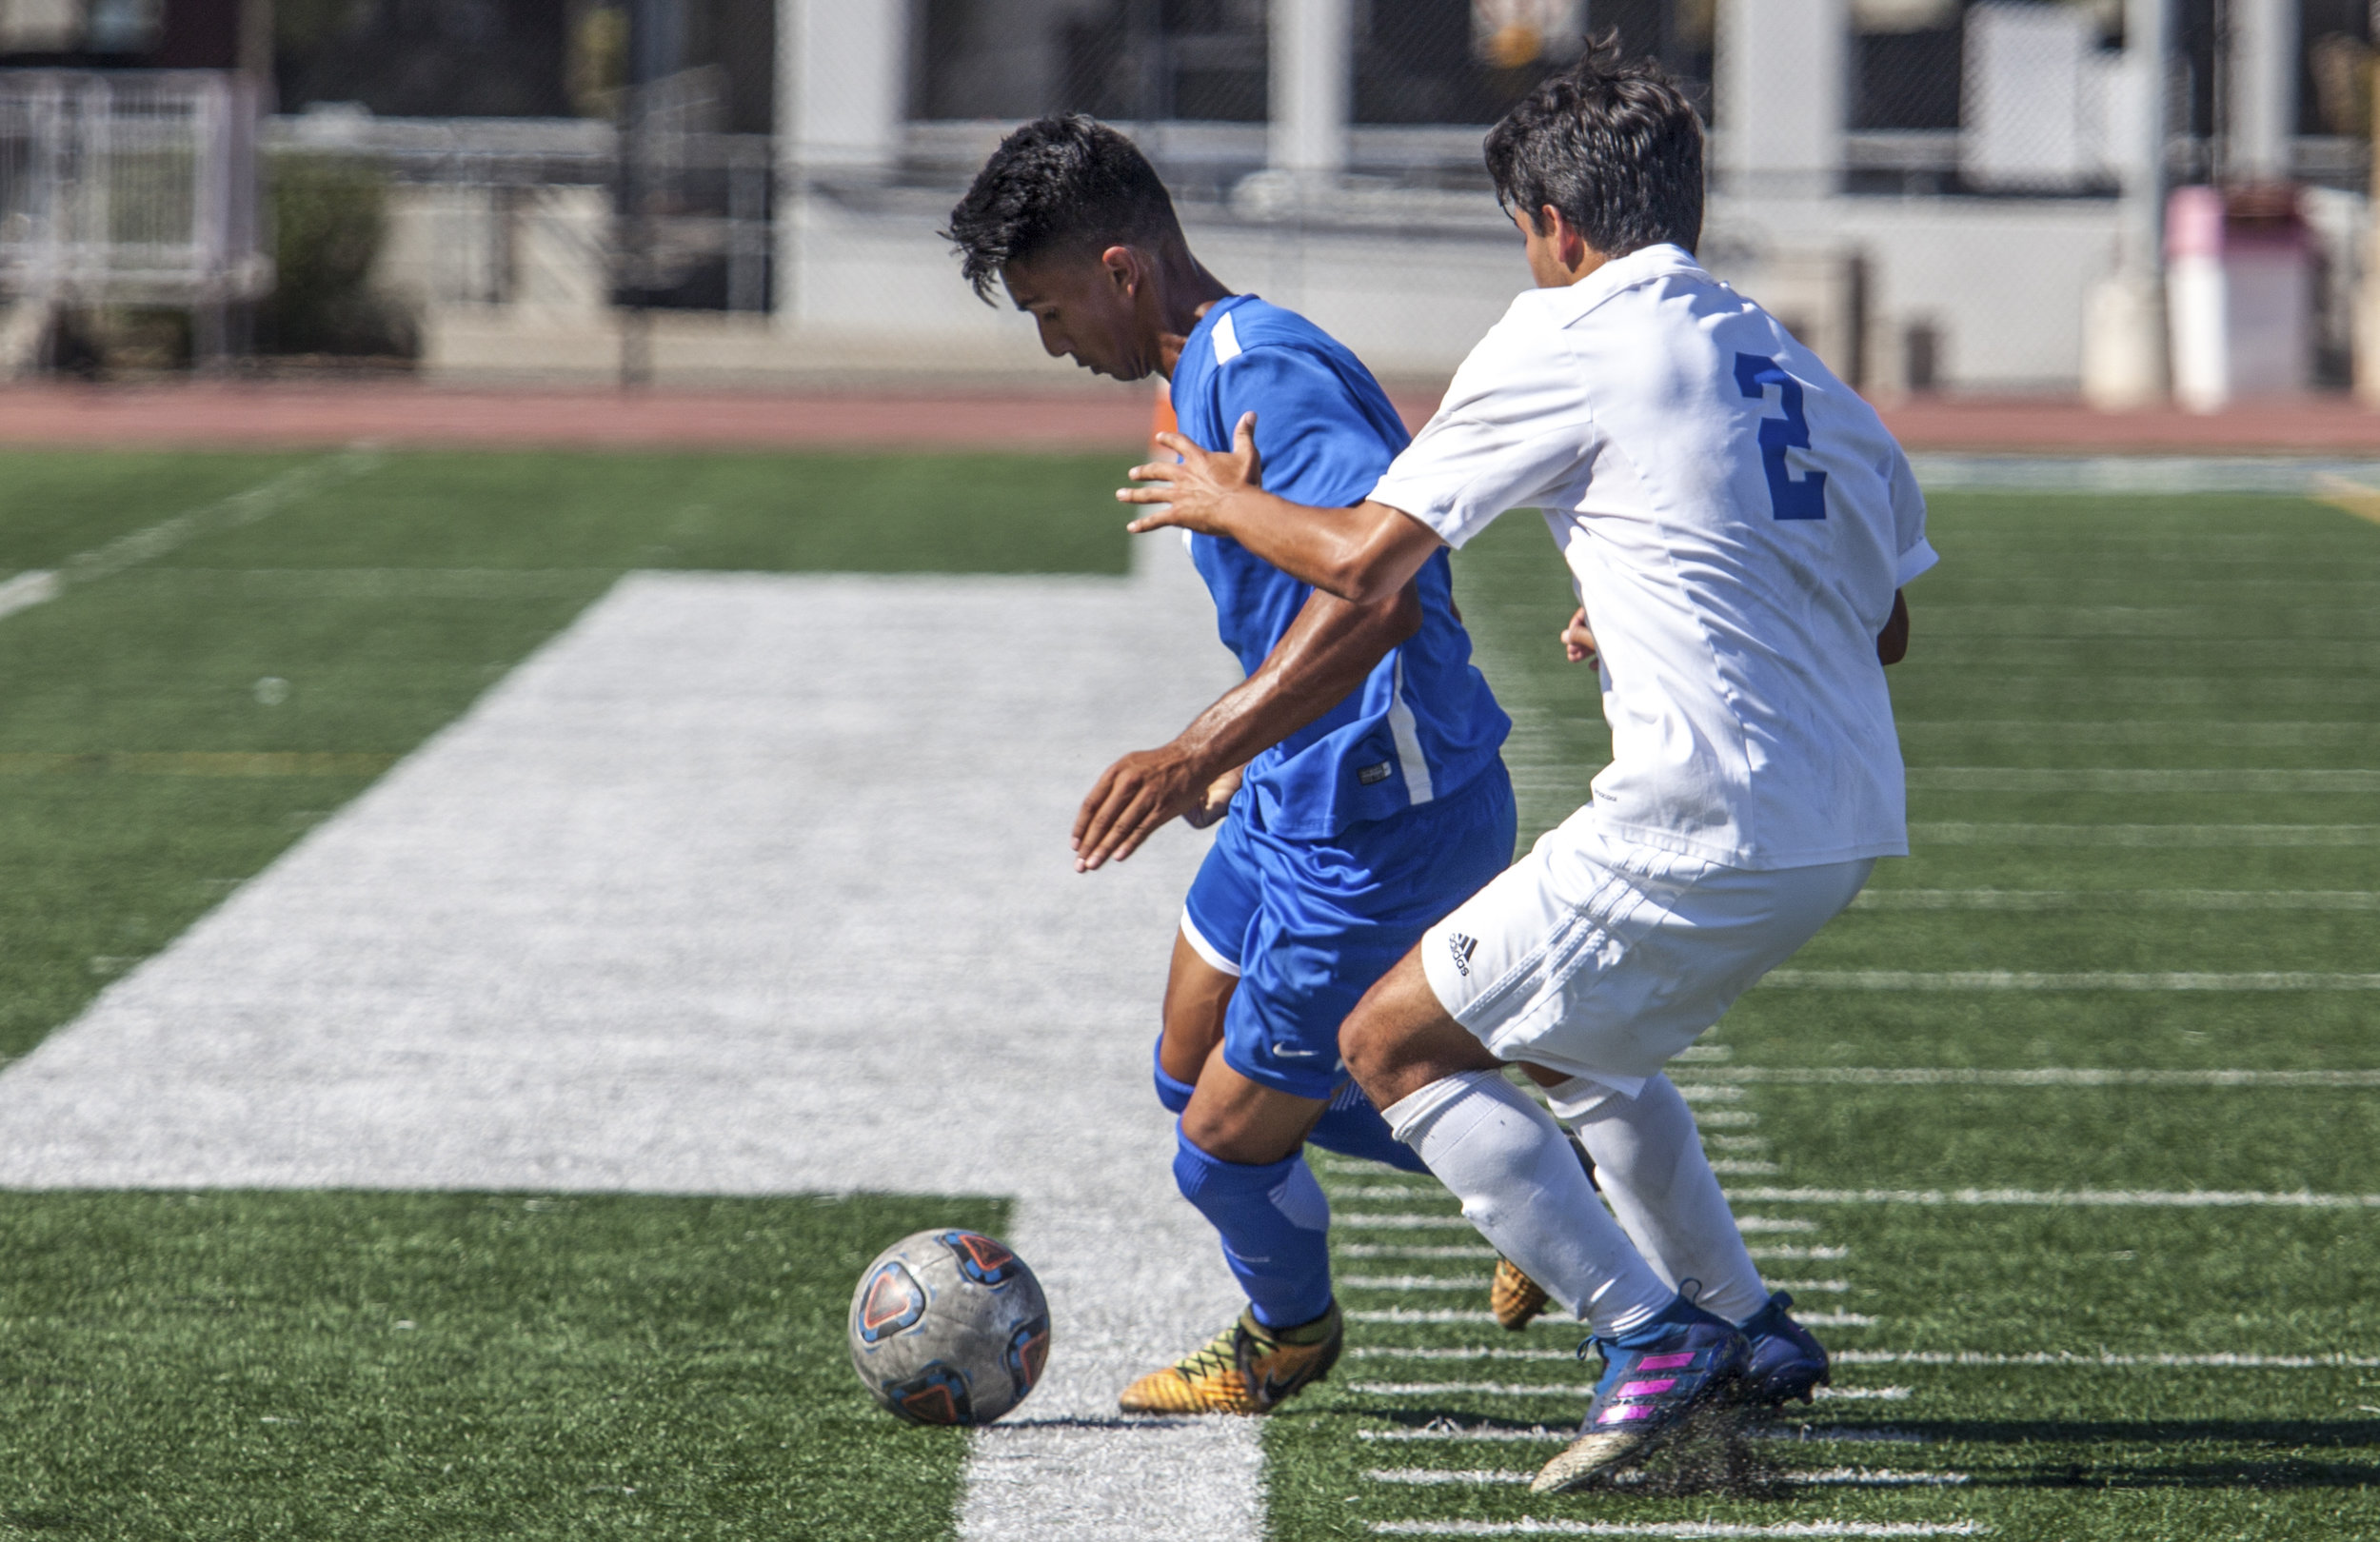  Andy Naidu (8) of the Santa Monica College protects the ball from Francisco Arroyo (2) of Oxnard College. On October 17, 2017 the Santa Monica College Corsairs won the game 2-0 against the Oxnard College. The match was held at the Corsair Stadium in